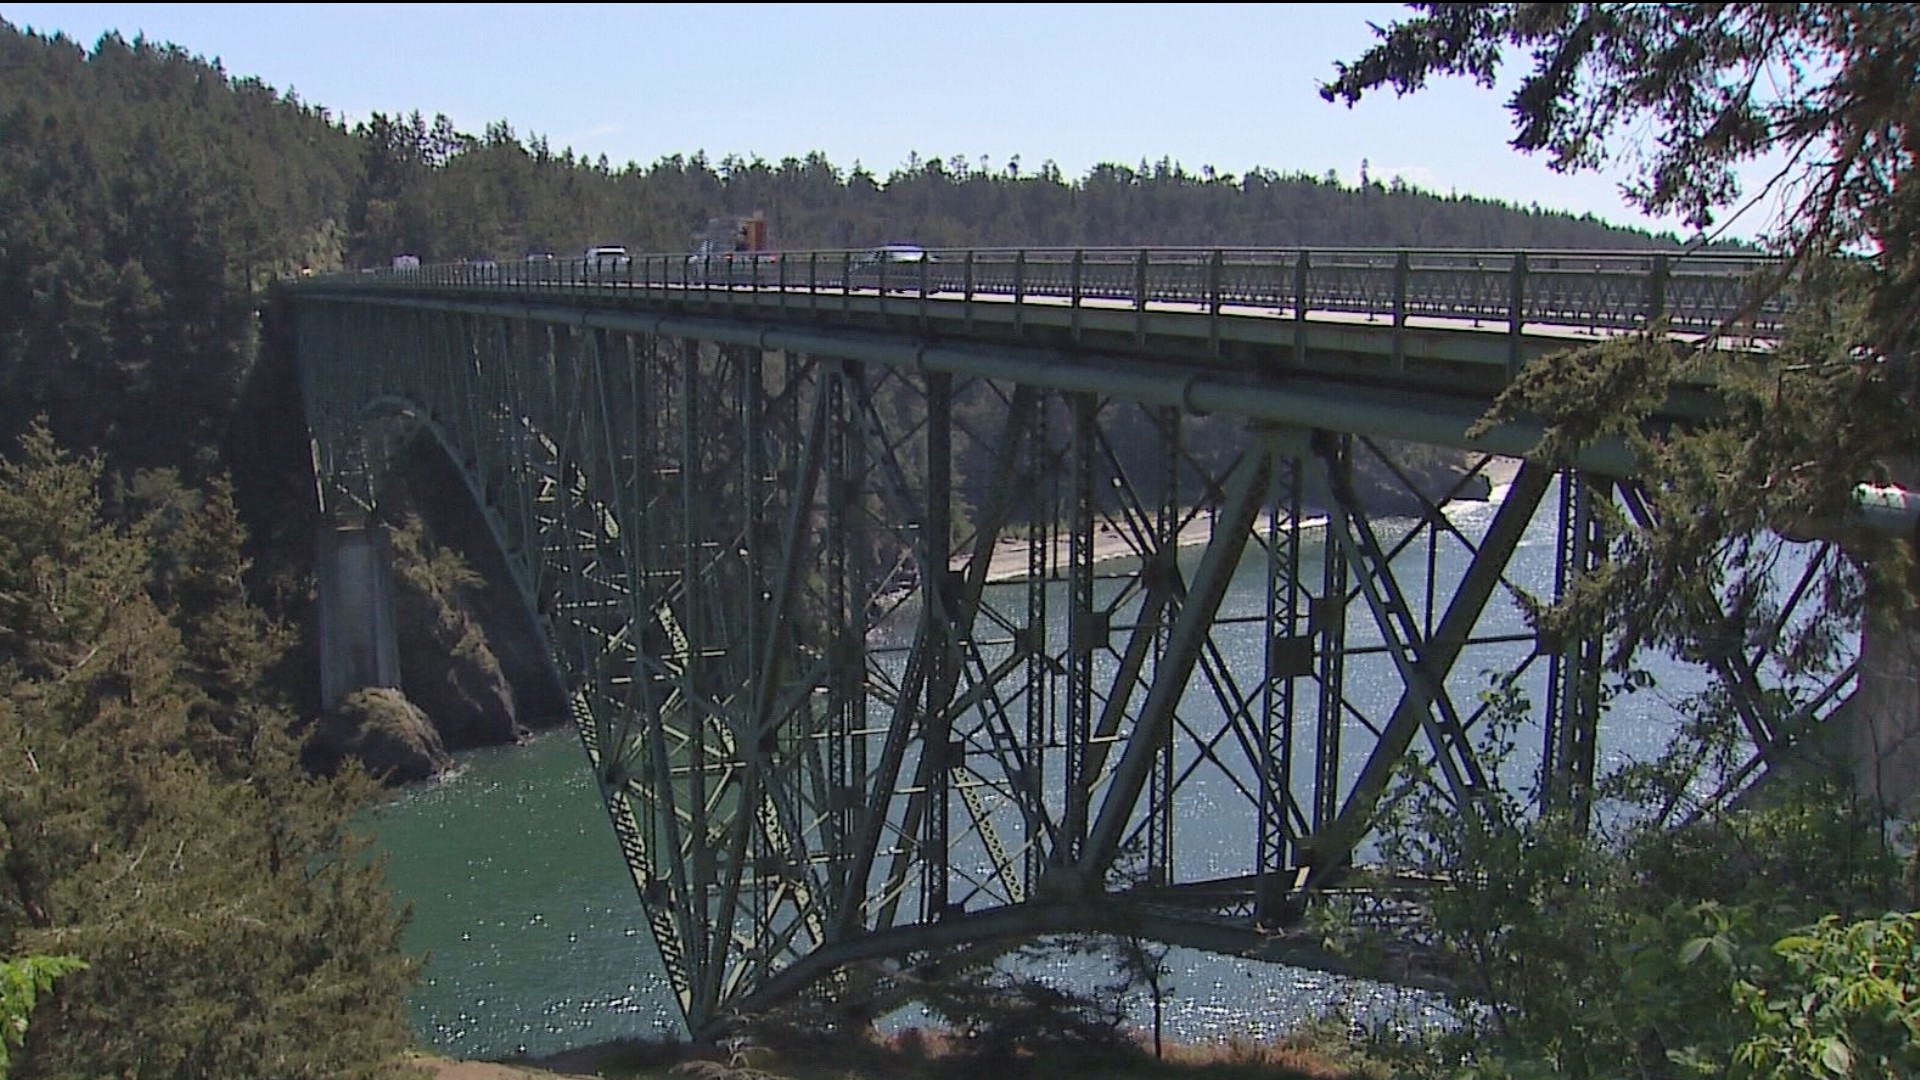 From the best views to interesting history, former park manager Jack Hartt shares his expertise. Deception Pass is 2019's Best Roadside Attraction.